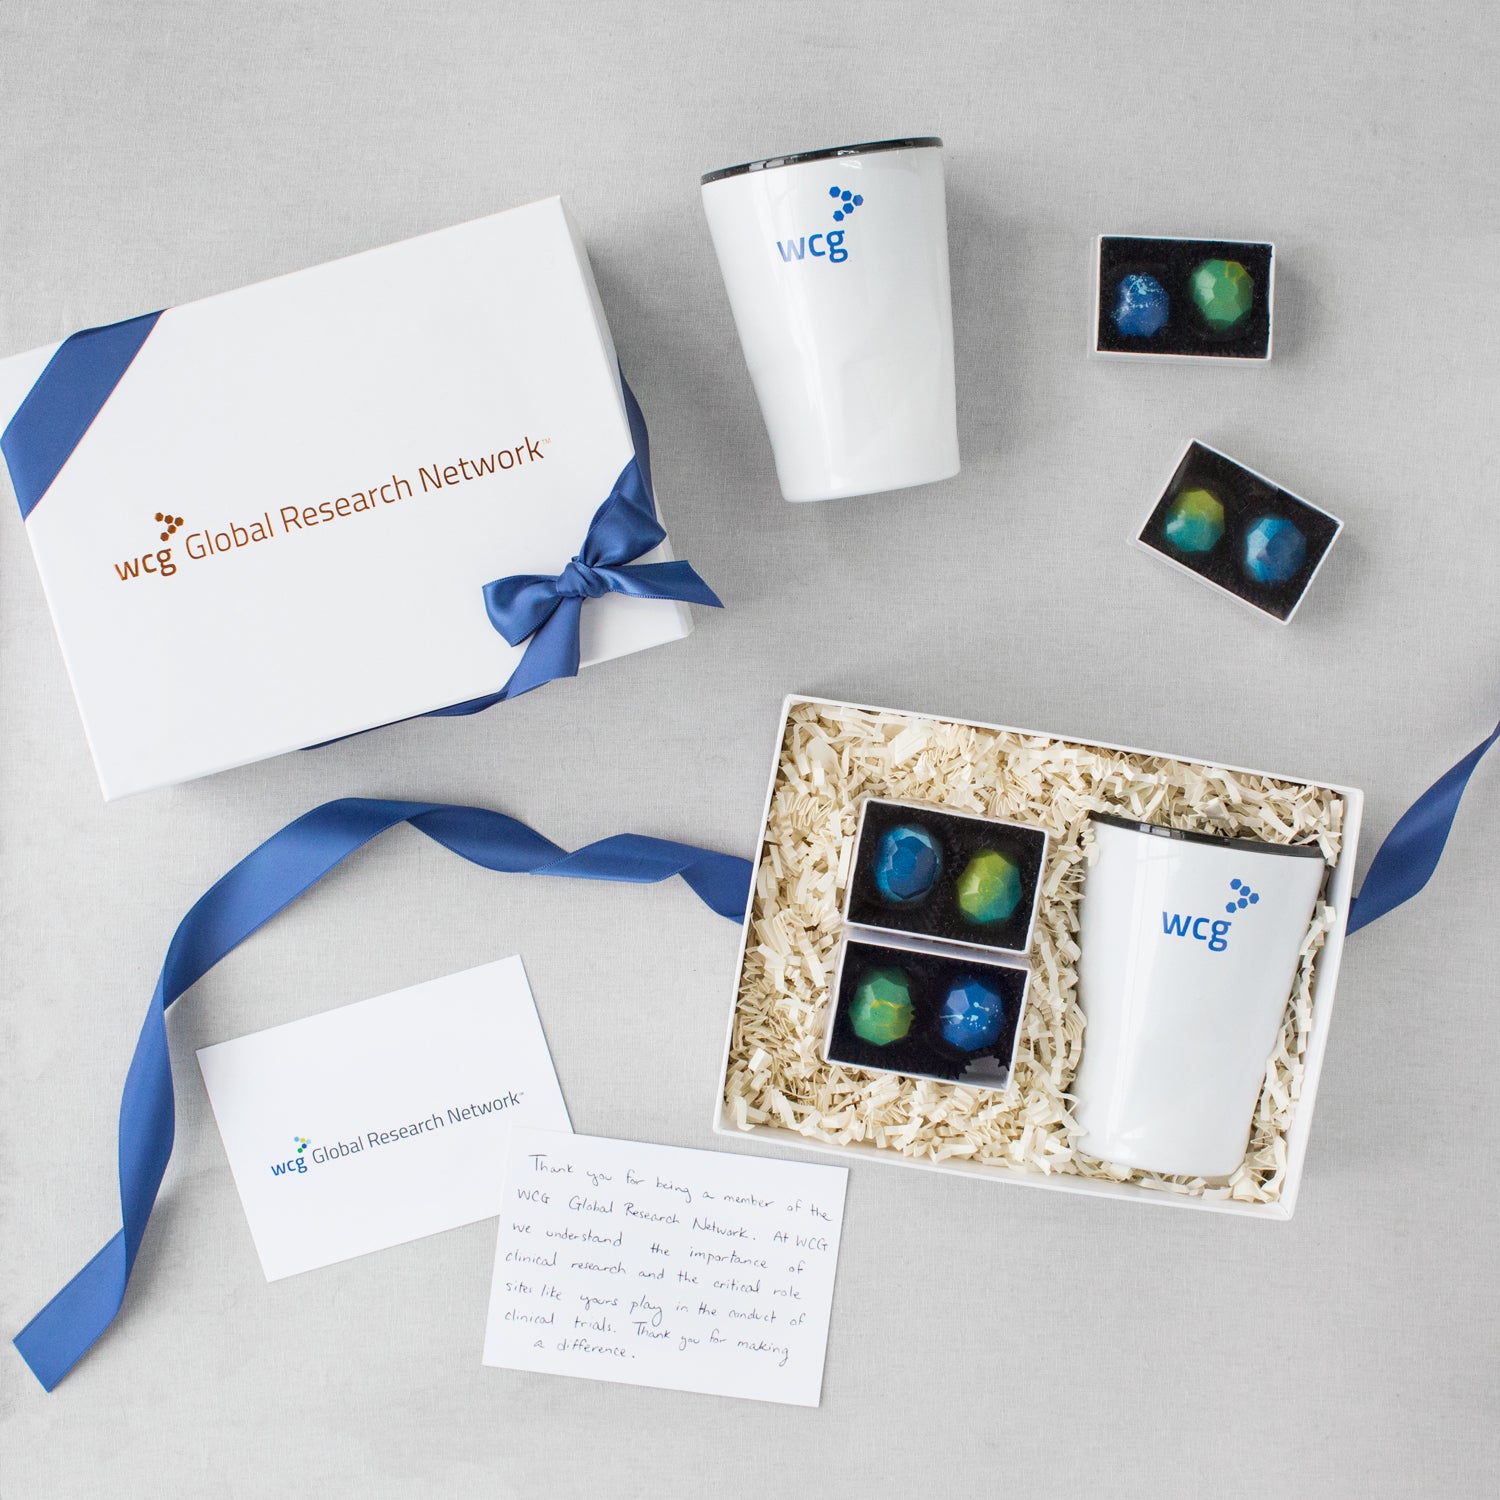 Modern & Elevated Corporate Gifting - View Our Work - Foxblossom Co.